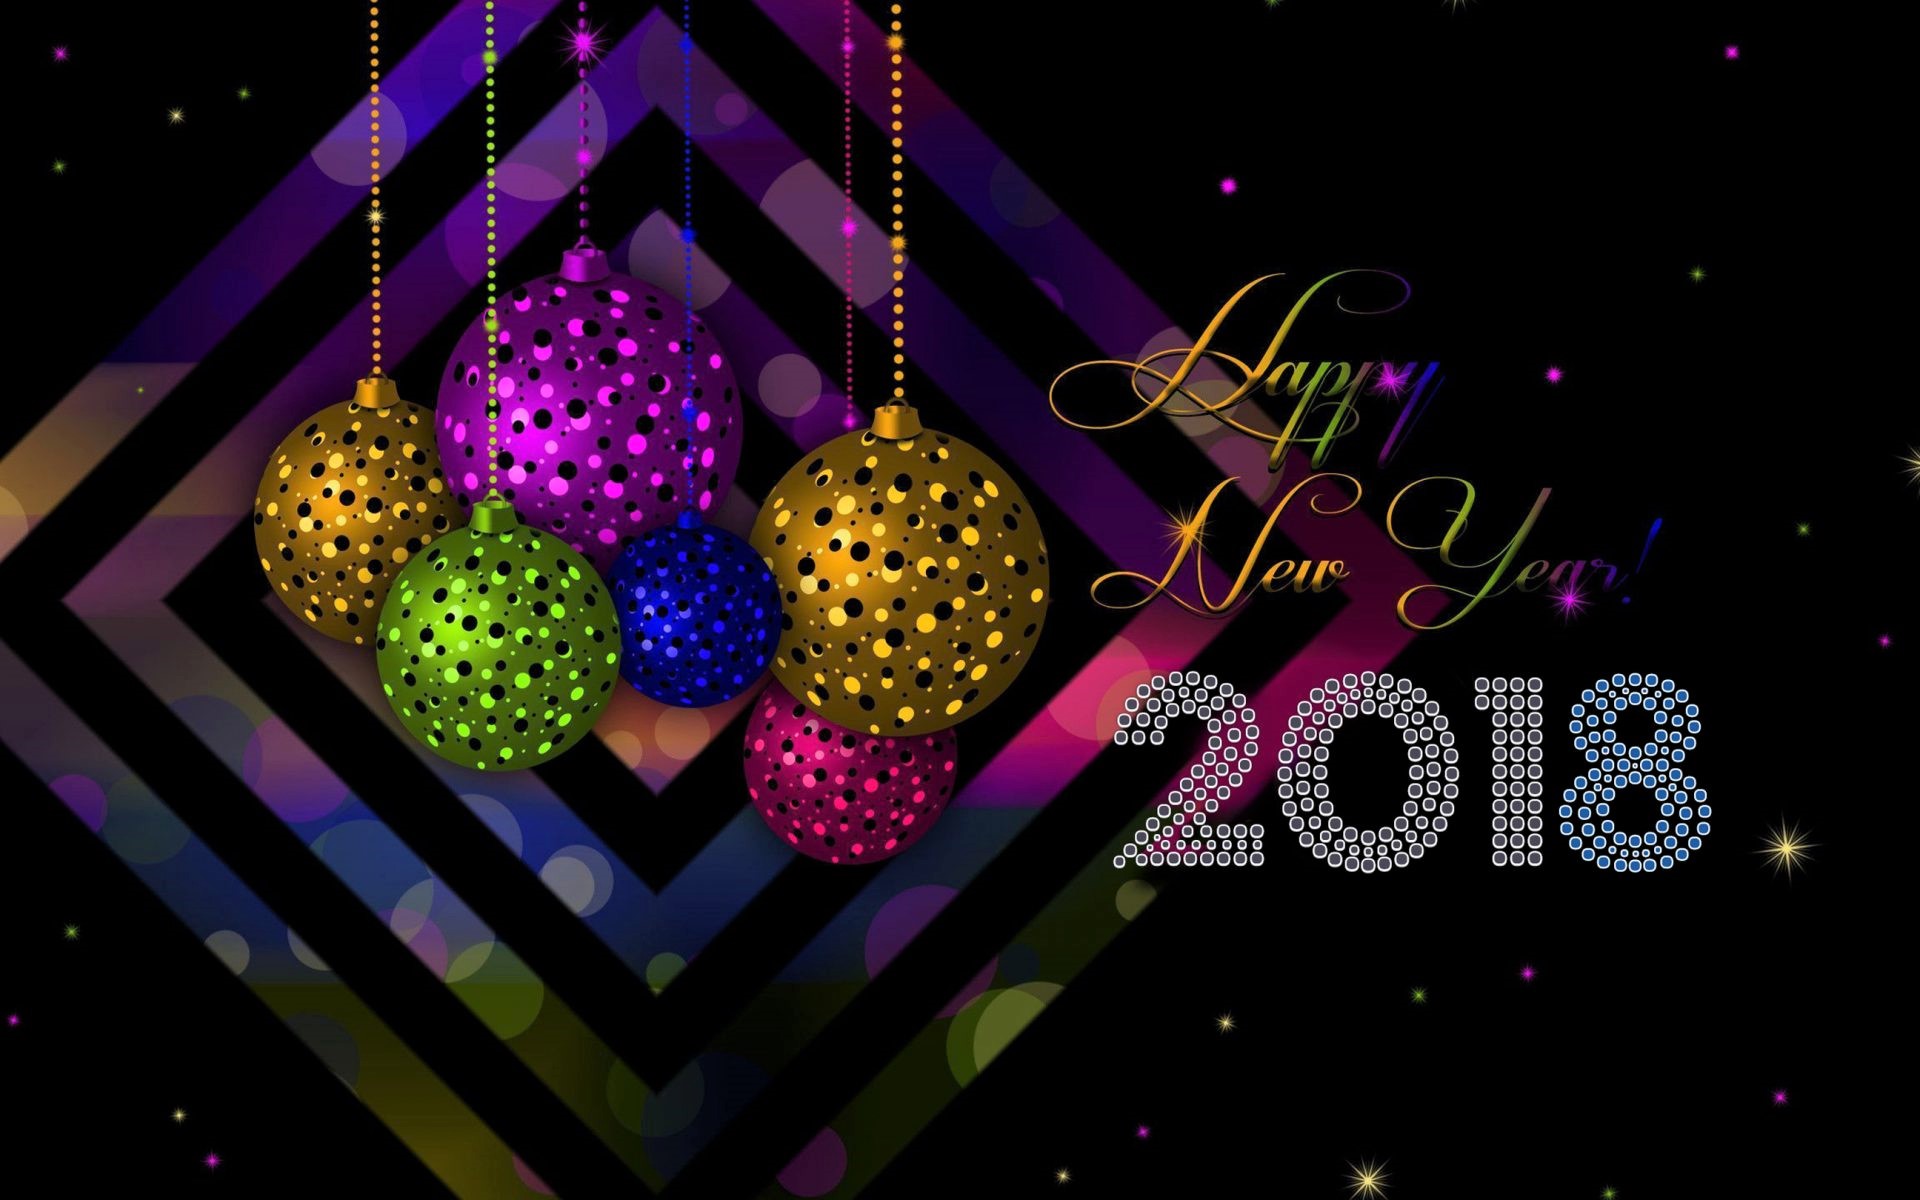 Happy New Year Holiday New Year New Year 2018 1920x1200